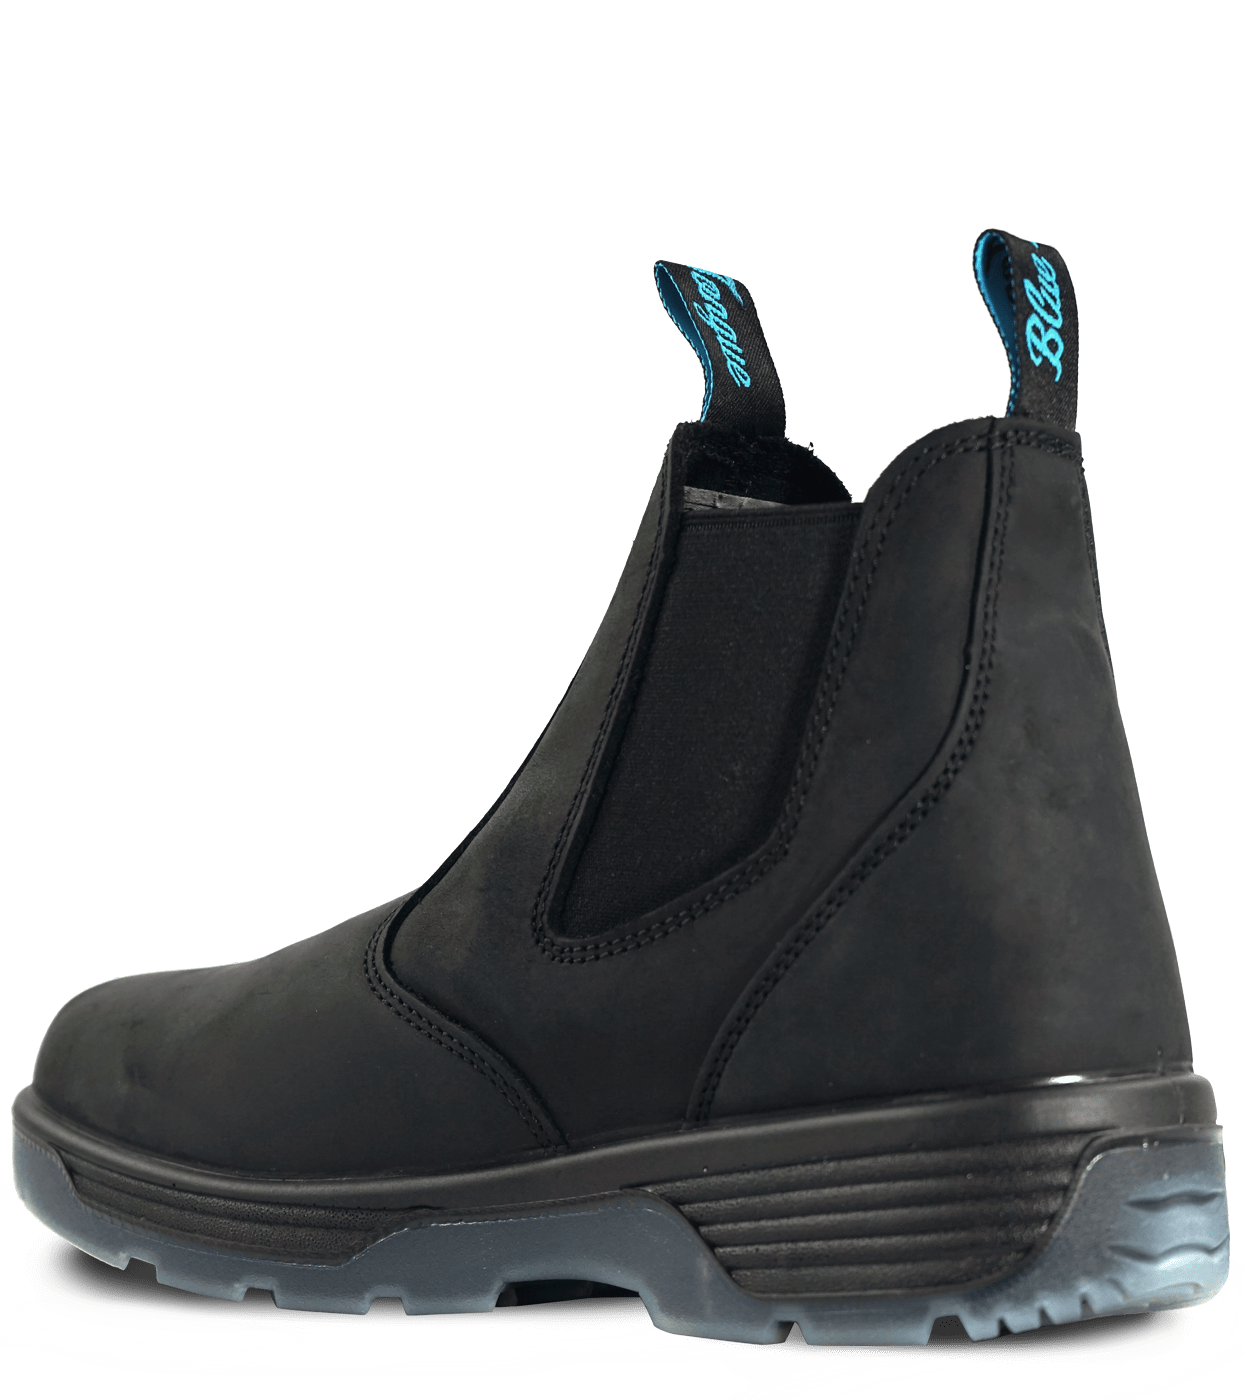 slip on composite toe boots